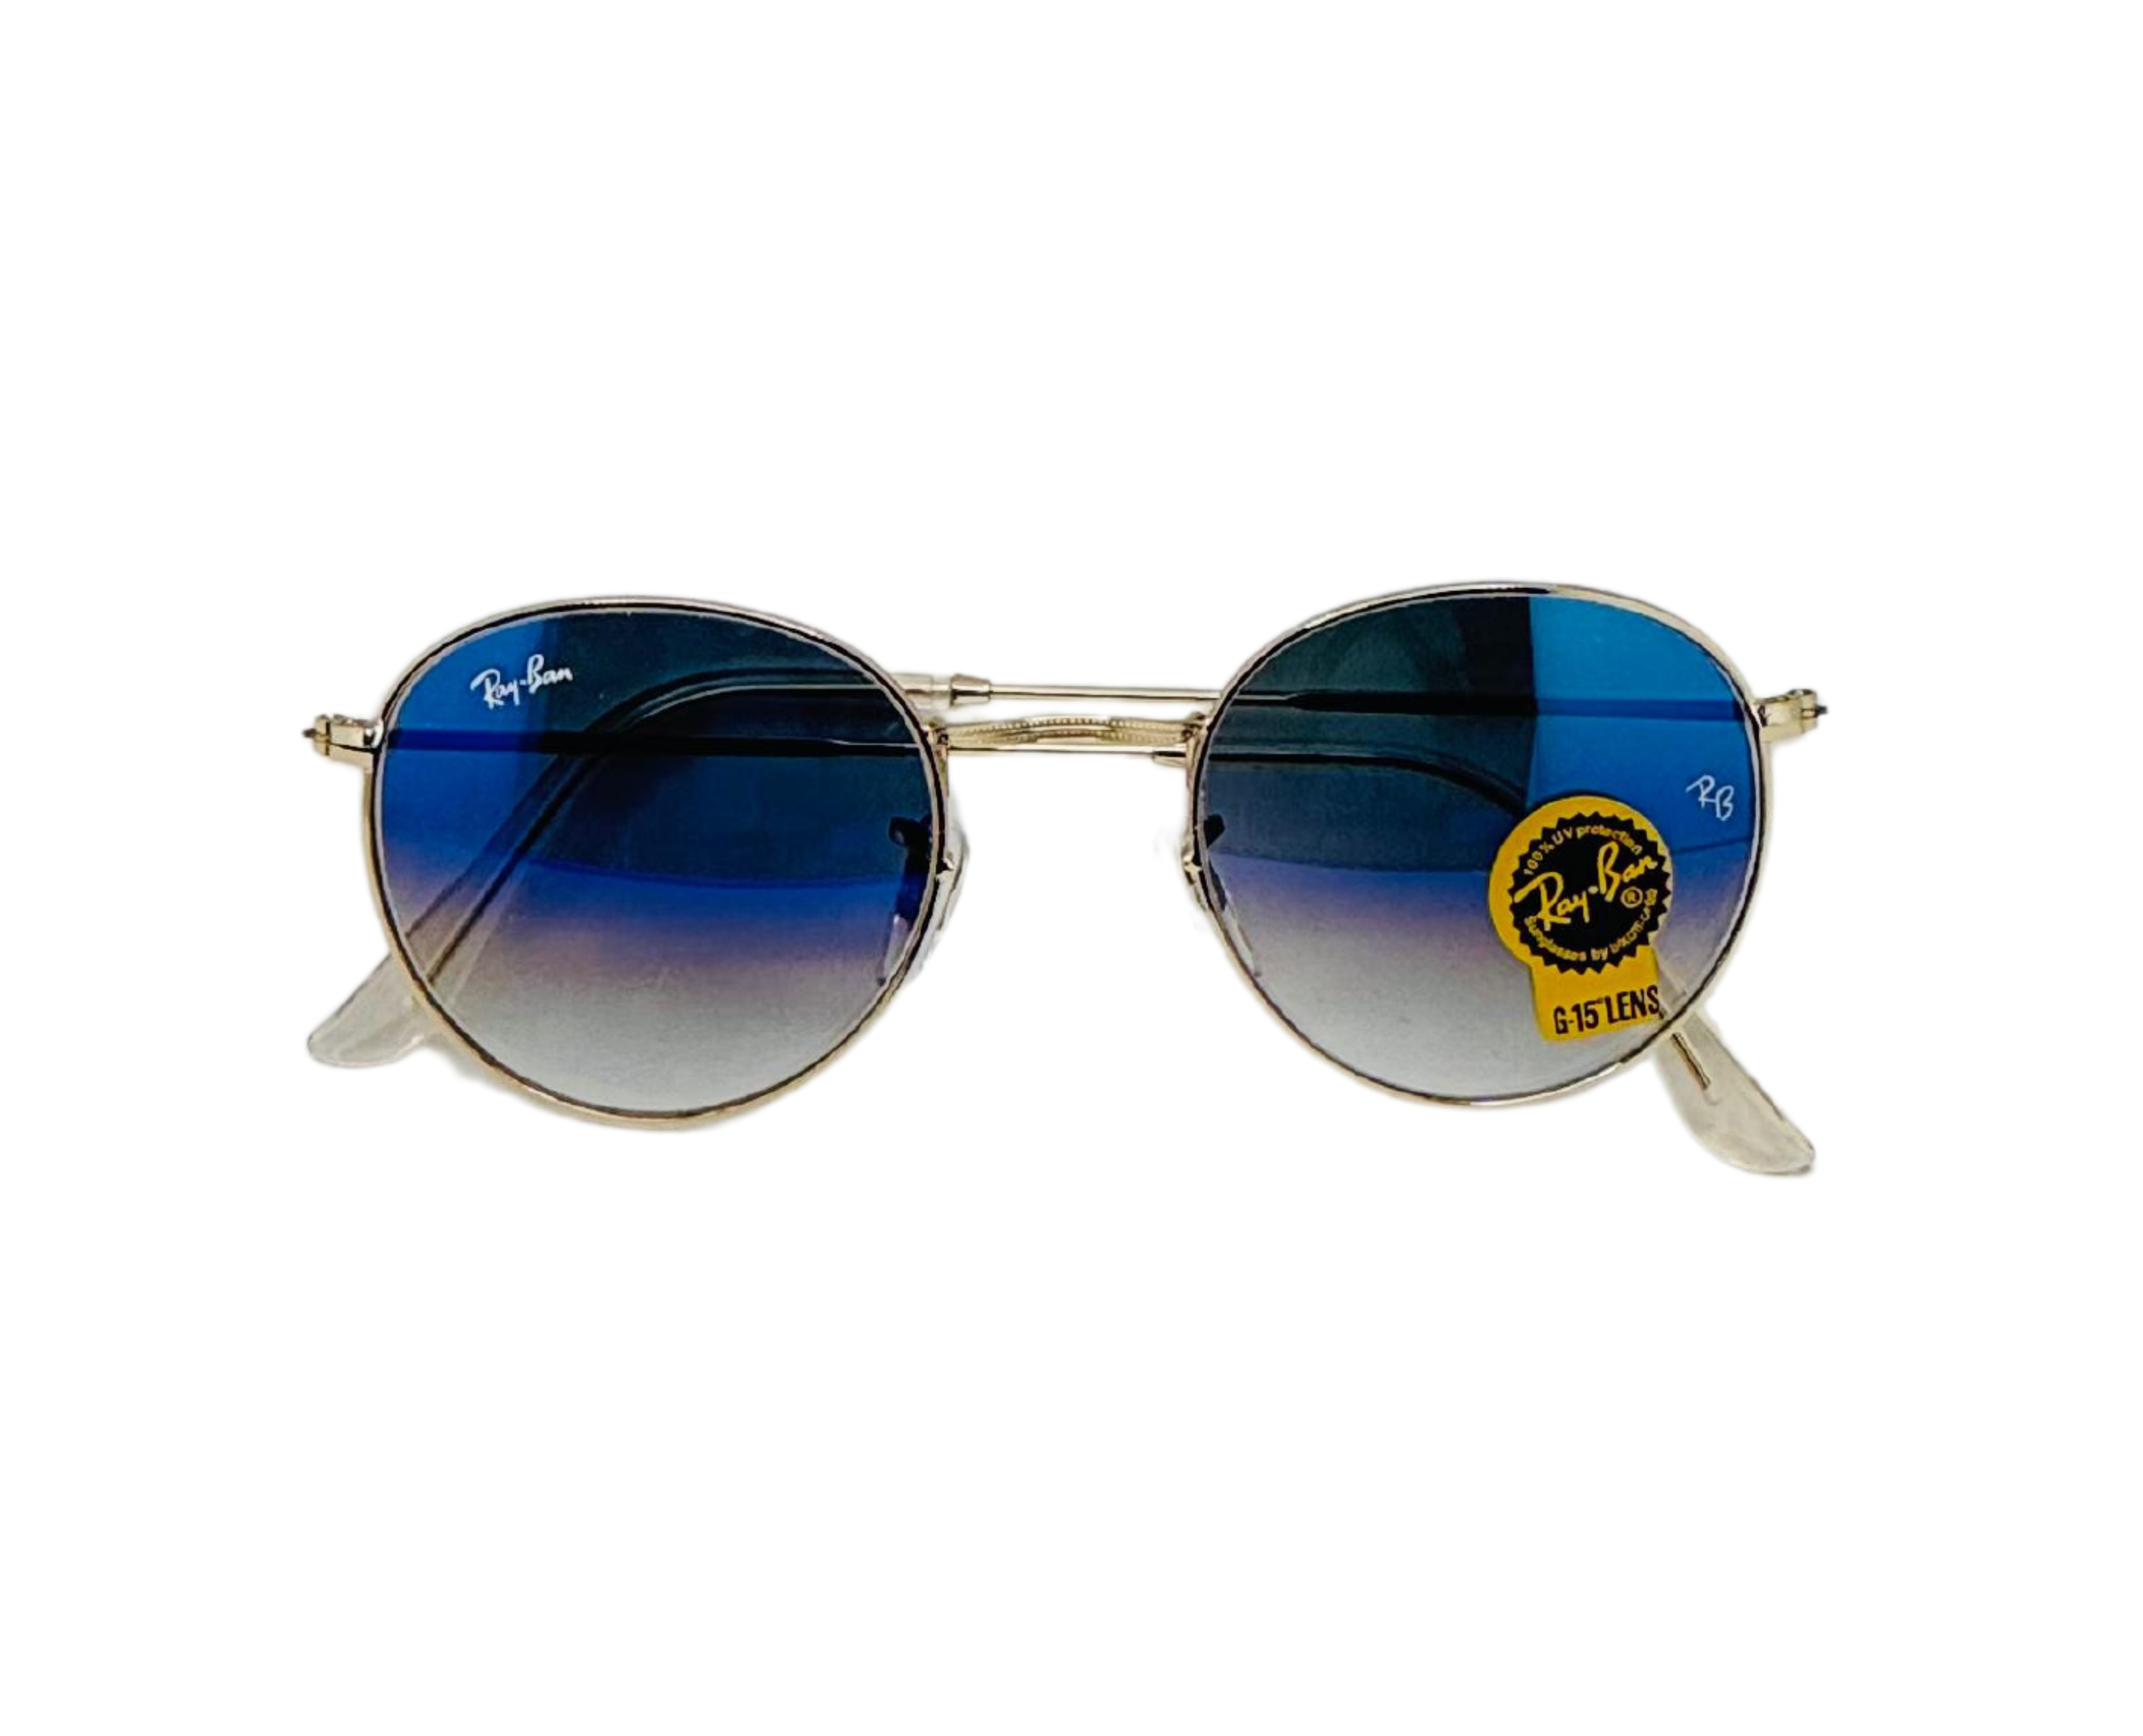 NS Deluxe - 3447 - Silver/Blue - Sunglasses